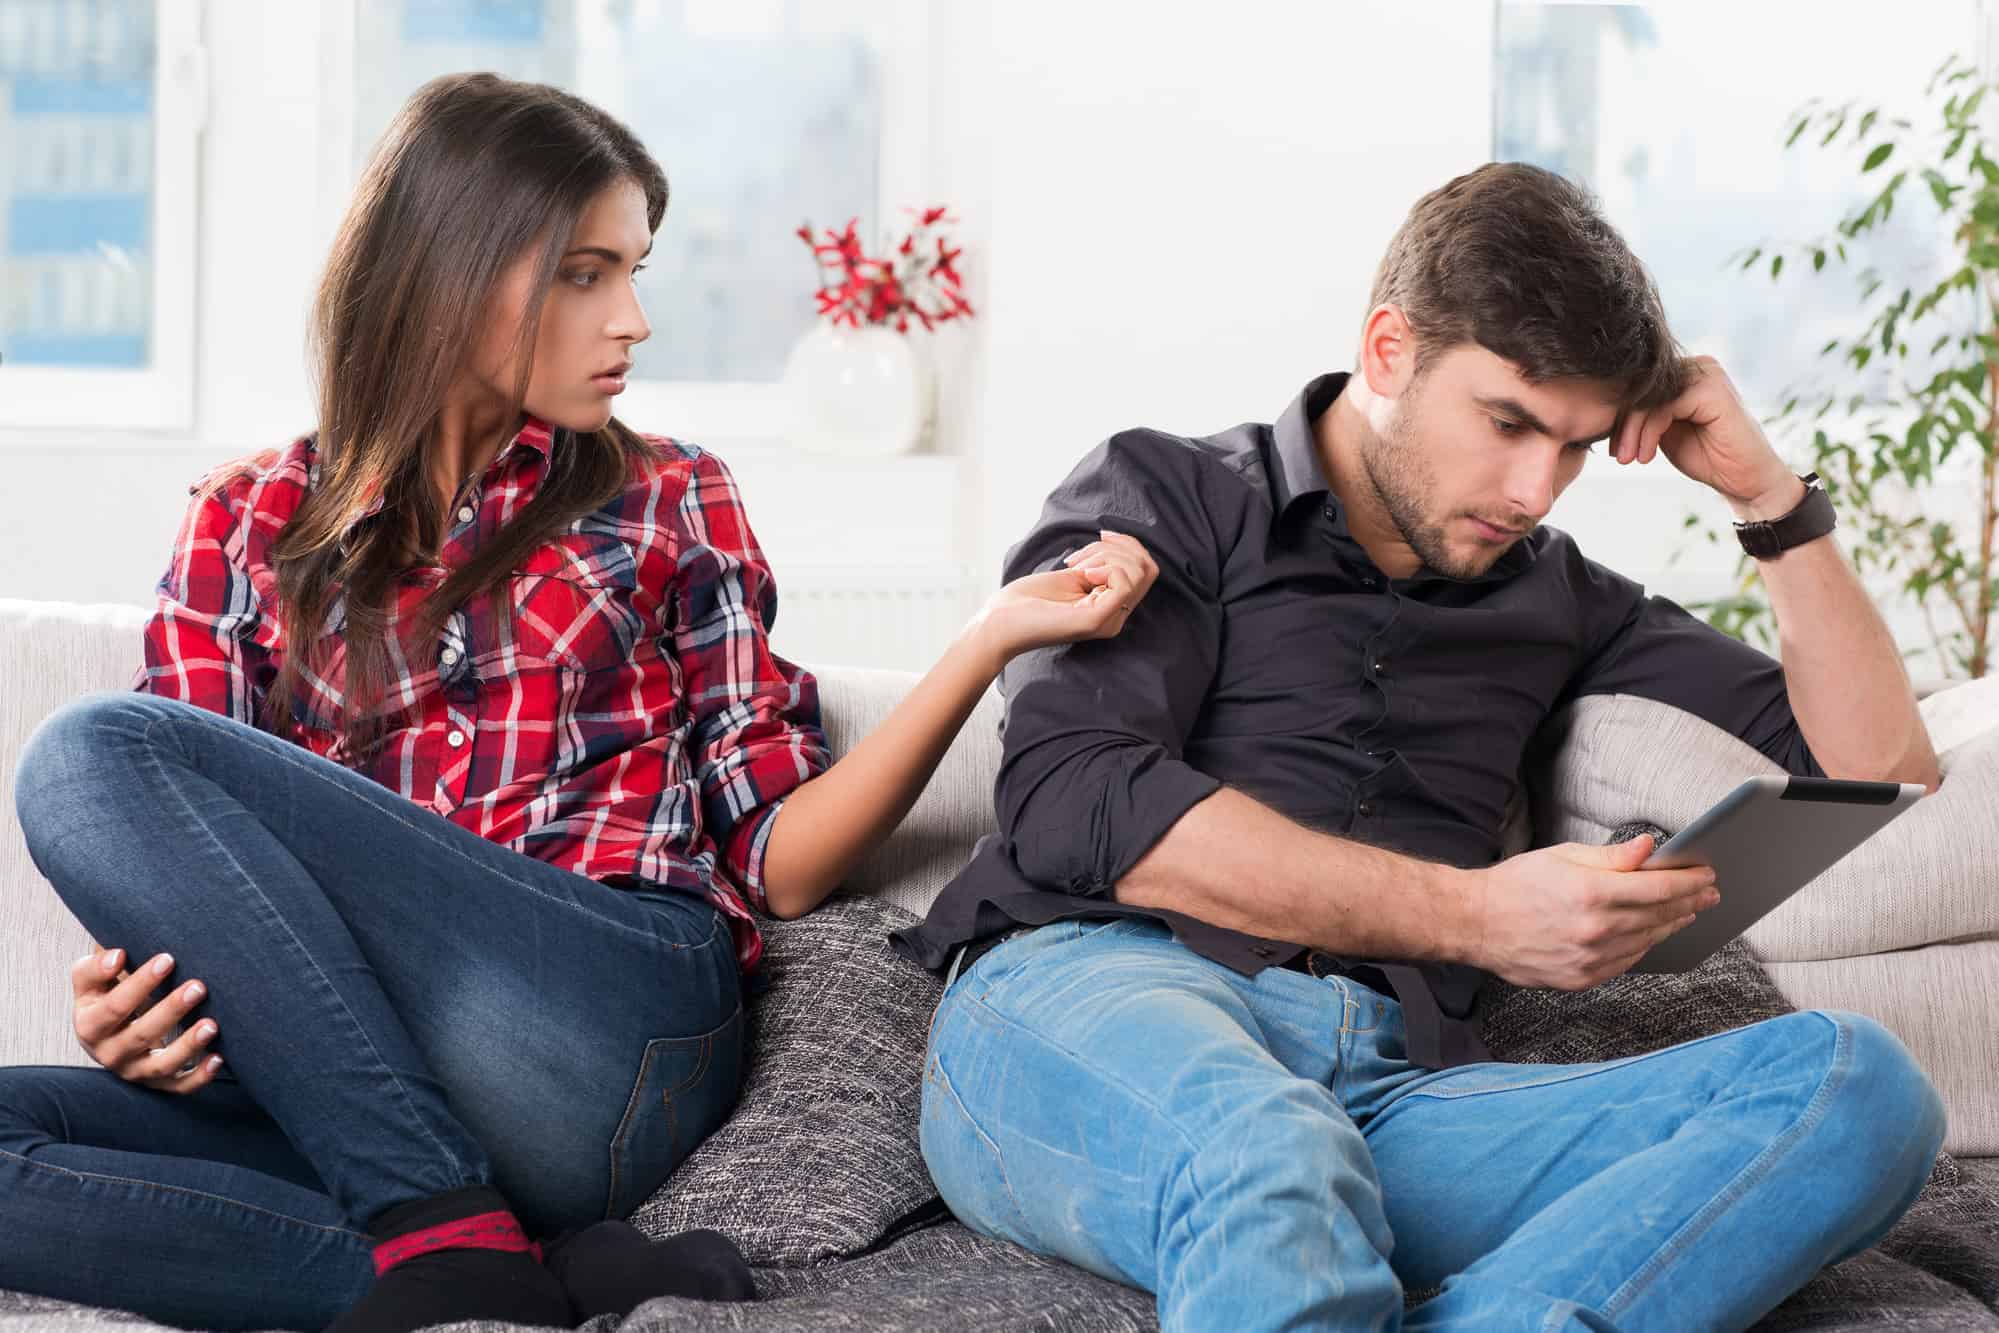 A man and woman sitting on a couch looking at a tablet